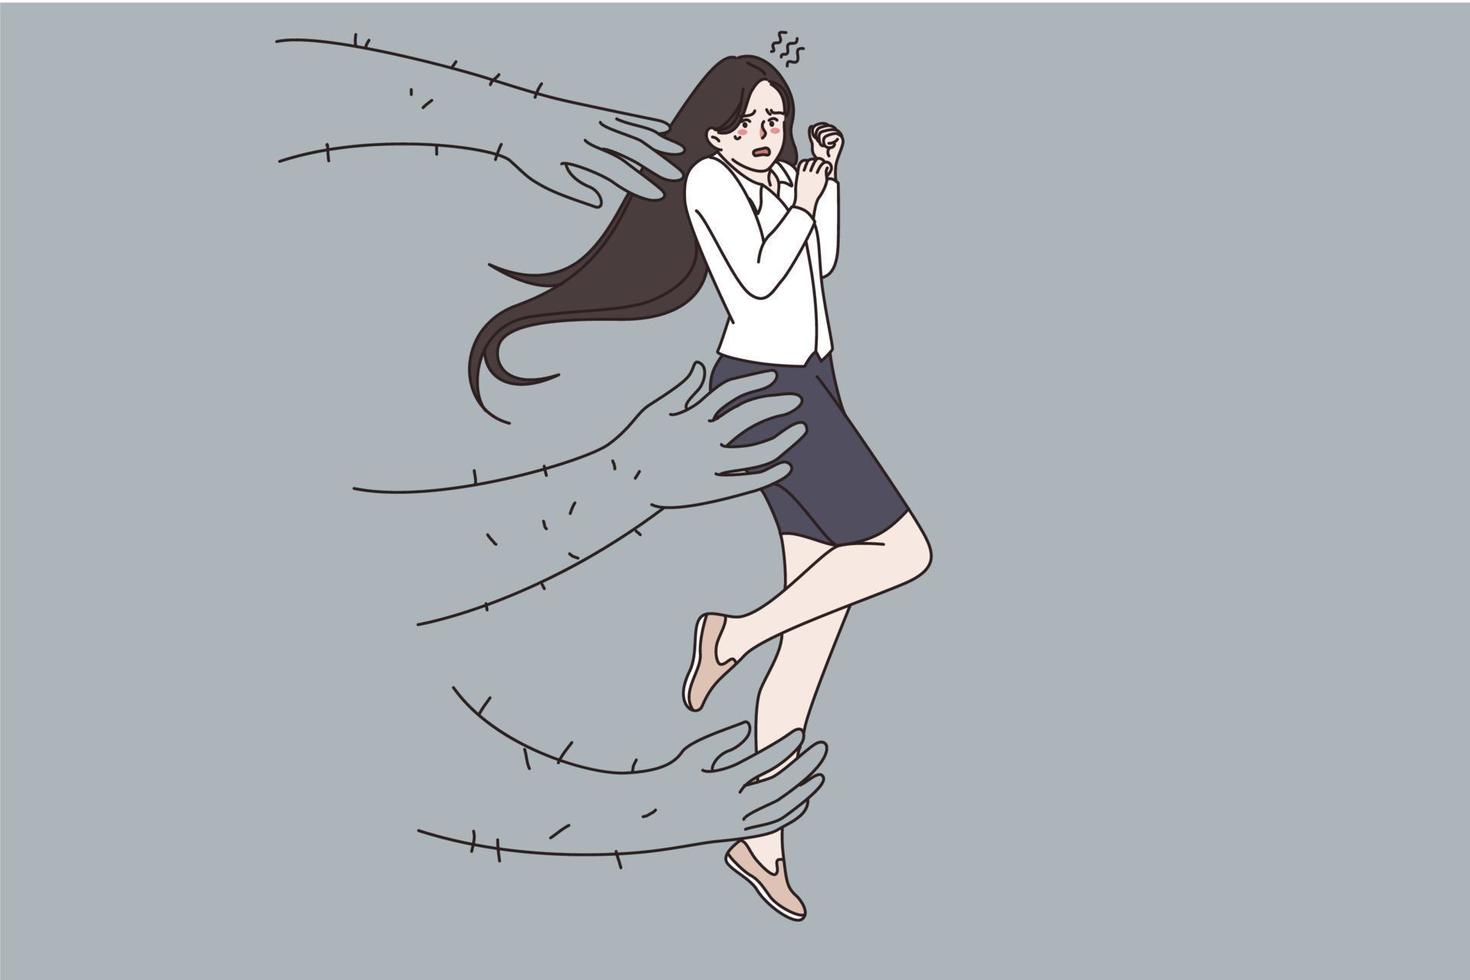 Scared terrified young woman grasped by huge hands, suffer from men aggressive rude behavior. Girl struggle with sexual harassment at work. Violence and bullying problem concept. Vector illustration.